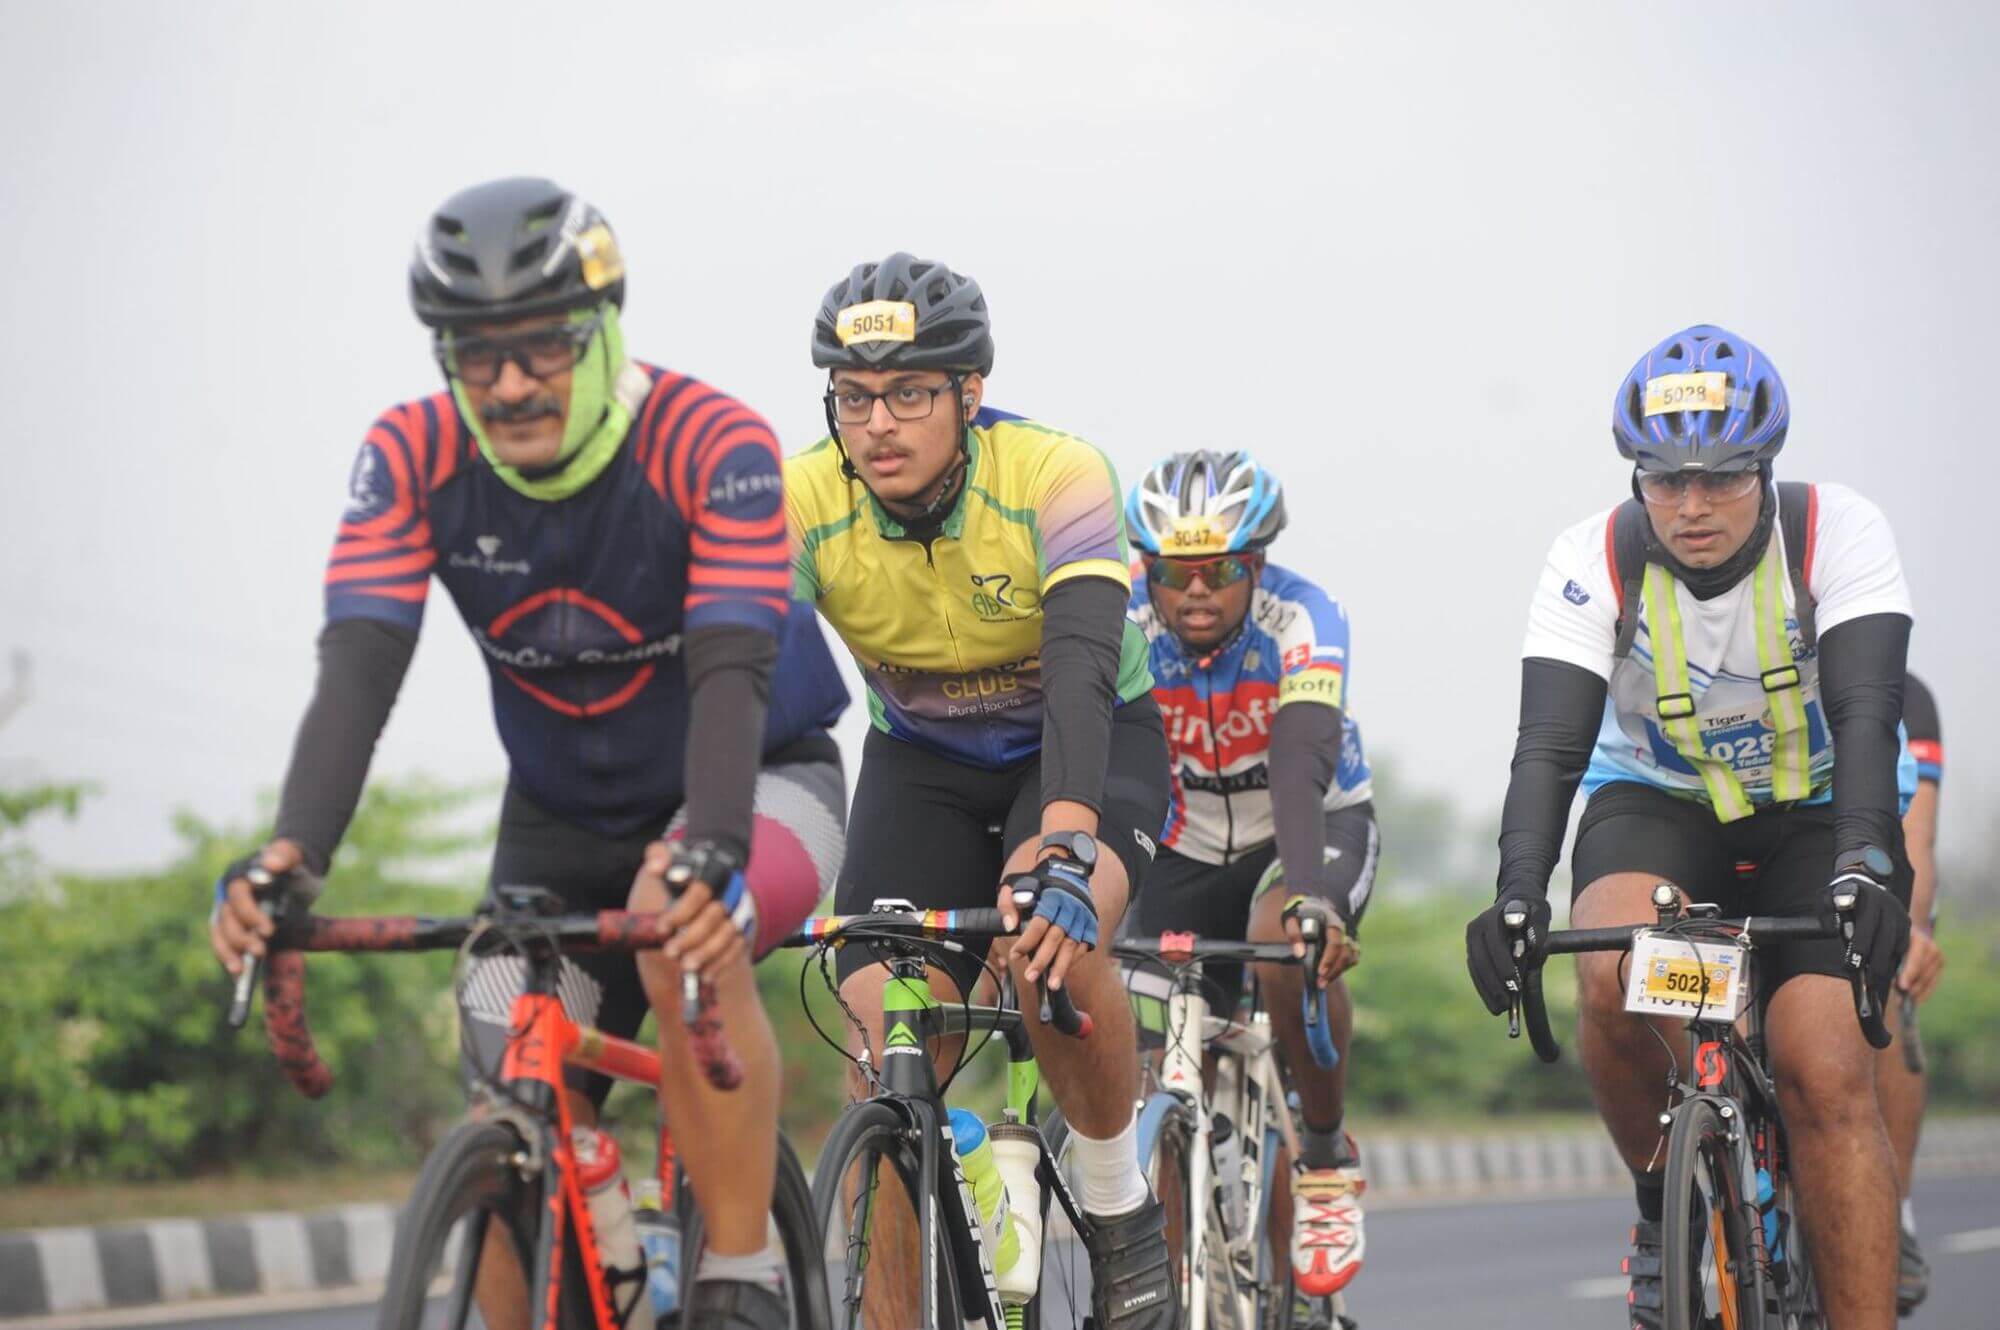 Cyclists racing as promotion for the Race Across India